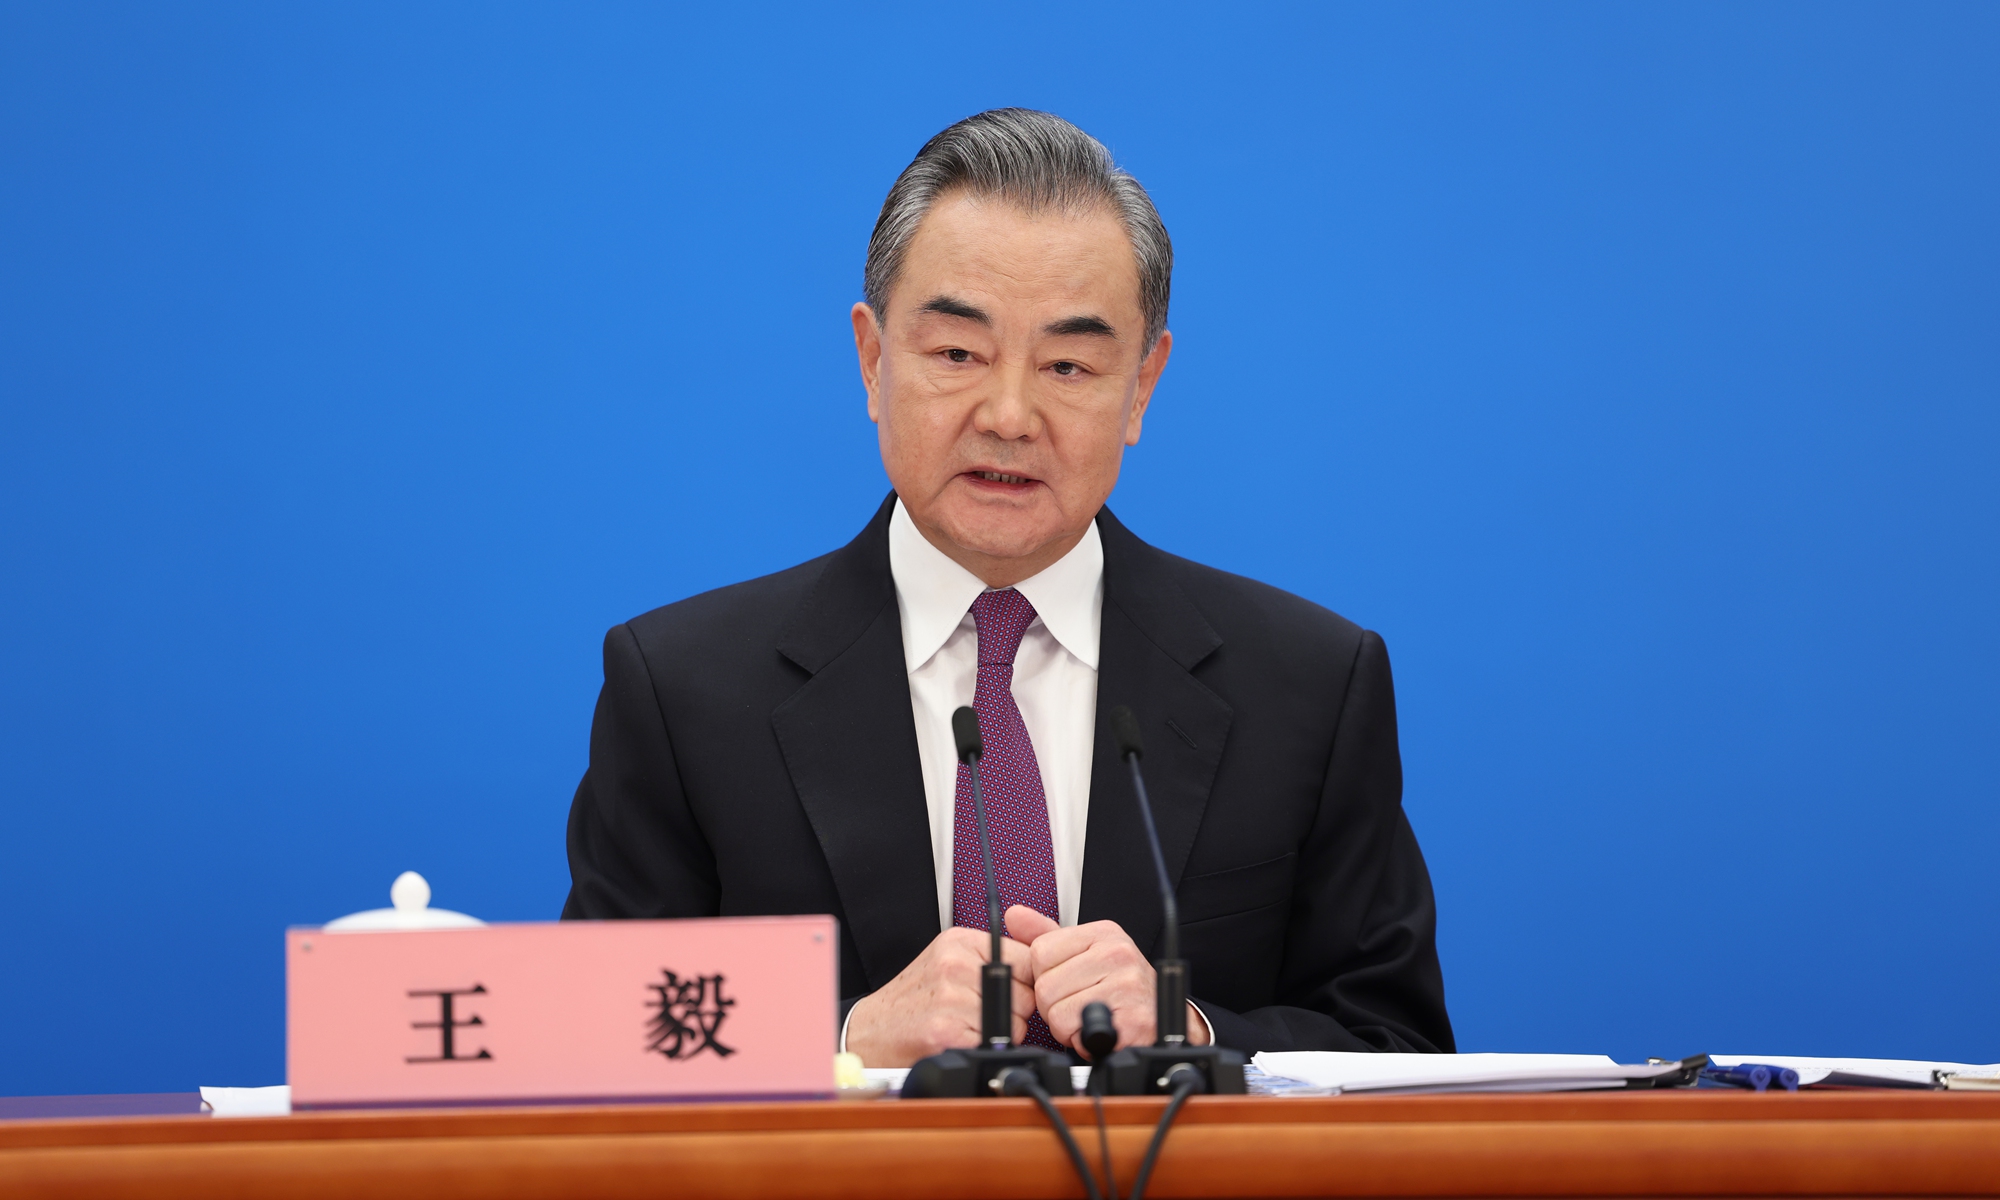 Chinese State Councilor and Foreign Minister Wang Yi attends a press conference on China's foreign policy and foreign relations via video link on the sidelines of the fifth session of the 13th National People's Congress at the Great Hall of the People in Beijing on March 7, 2022. Photo: The Paper